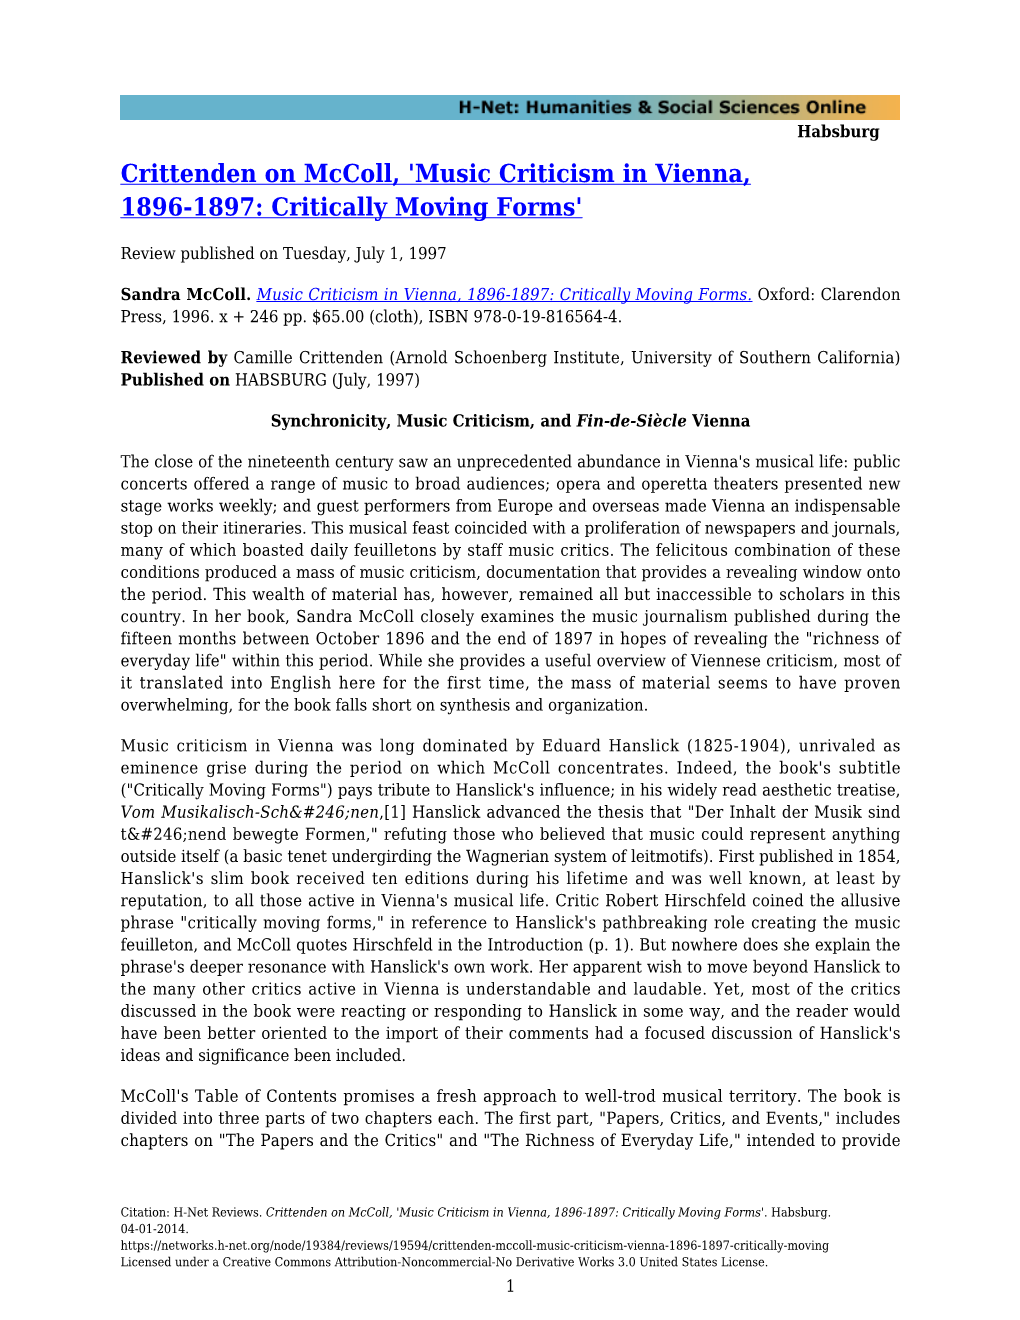 Music Criticism in Vienna, 1896-1897: Critically Moving Forms'